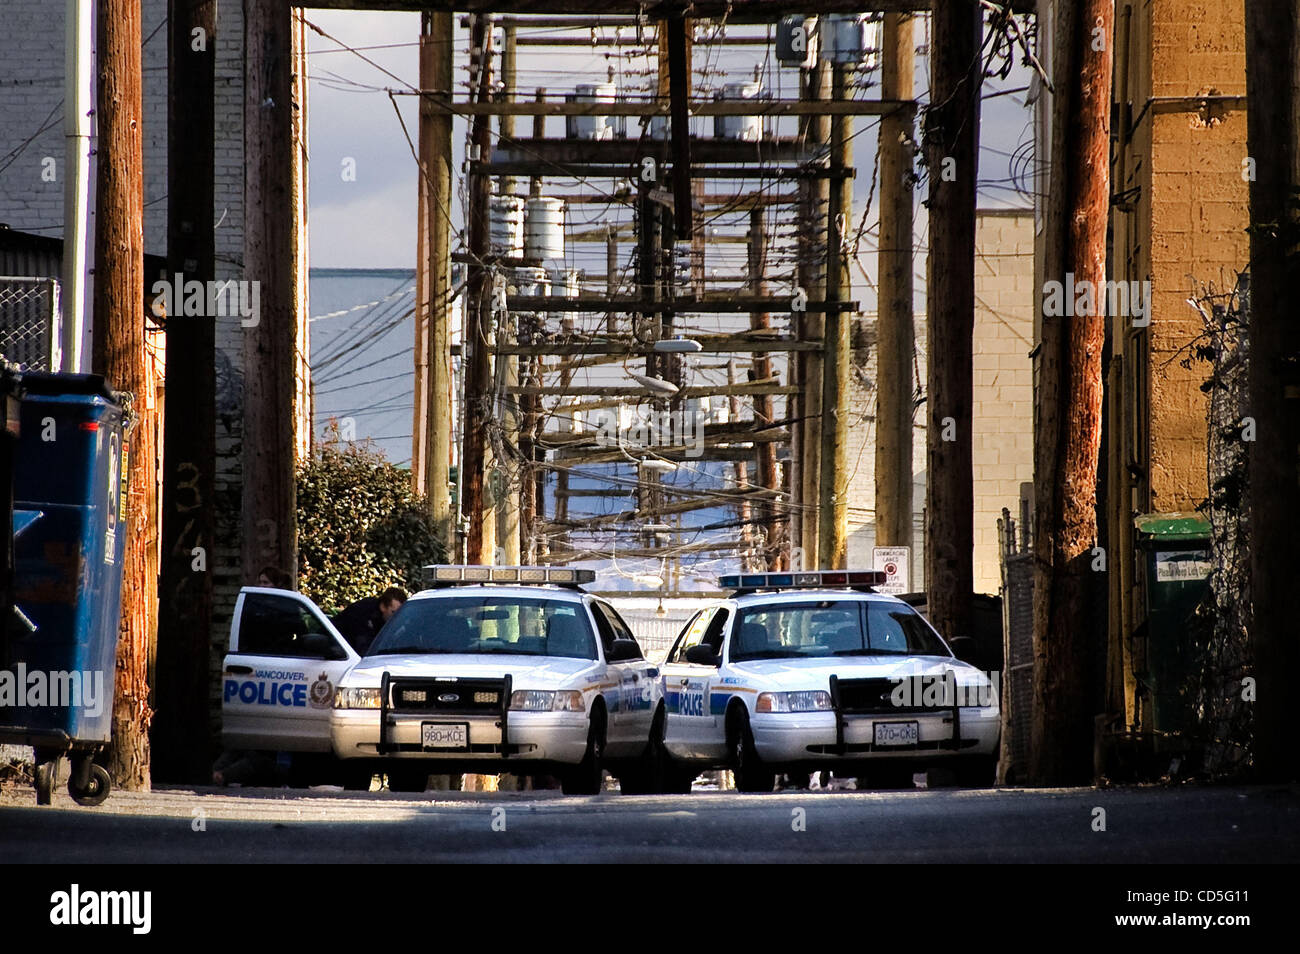 Jun. 12, 2008 - Vancouver, British Columbia, Canada - Squad cars on an alleyway drug raid. The Vancouver Police Department has a high-profile branch half a block from the dangerous crossroads of Hastings and Main. (Credit Image: ©Austin Andrews/zReportage.com/ZUMA) Stock Photo